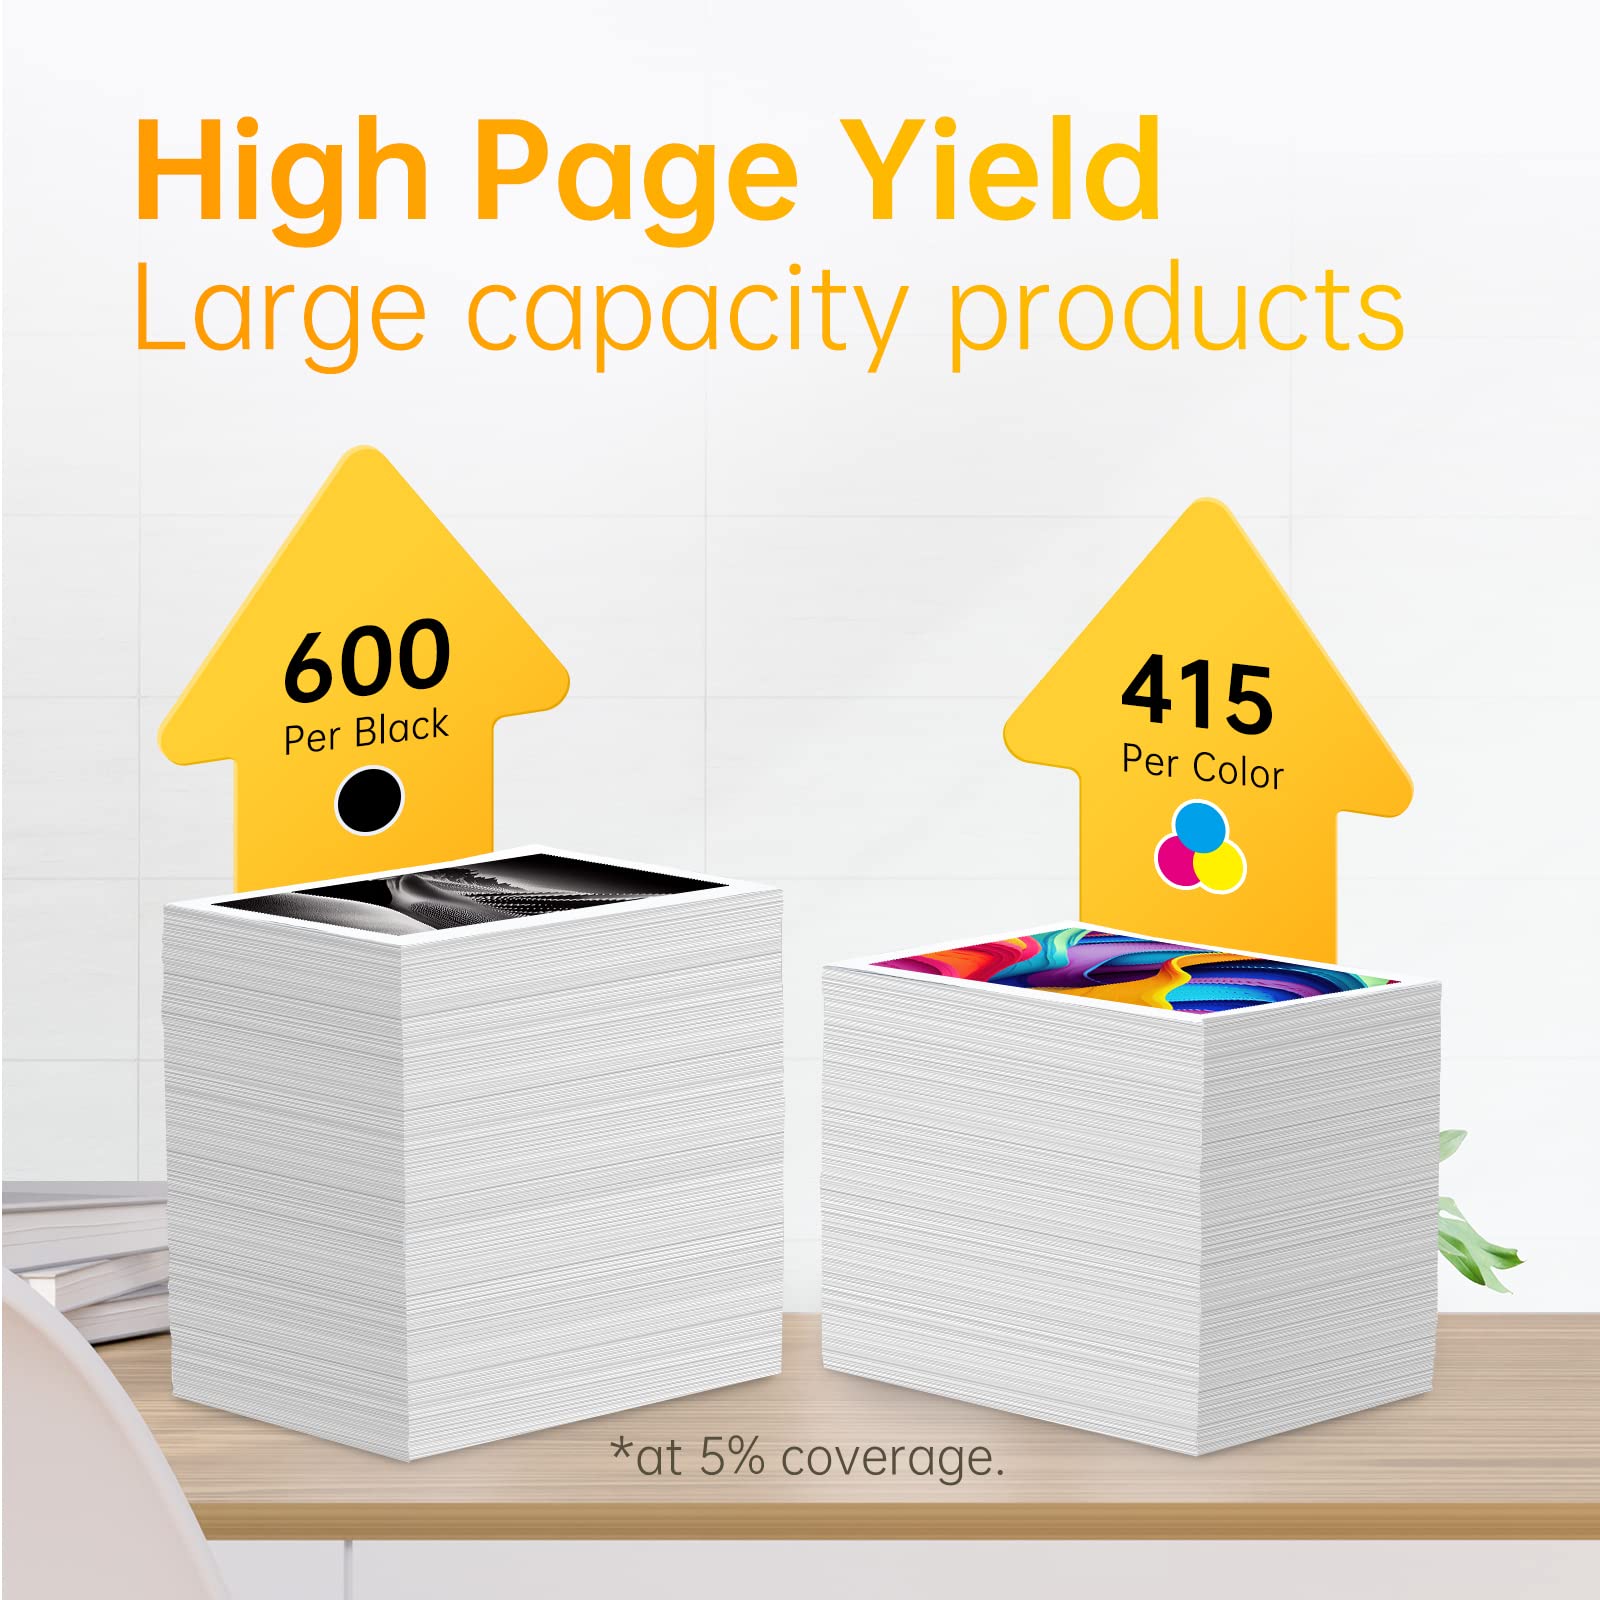 high page yield of HP 64XL ink cartridges, with 600 pages for black and 415 pages for color at 5% coverage, positioned over two large stacks of paper to illustrate capacity